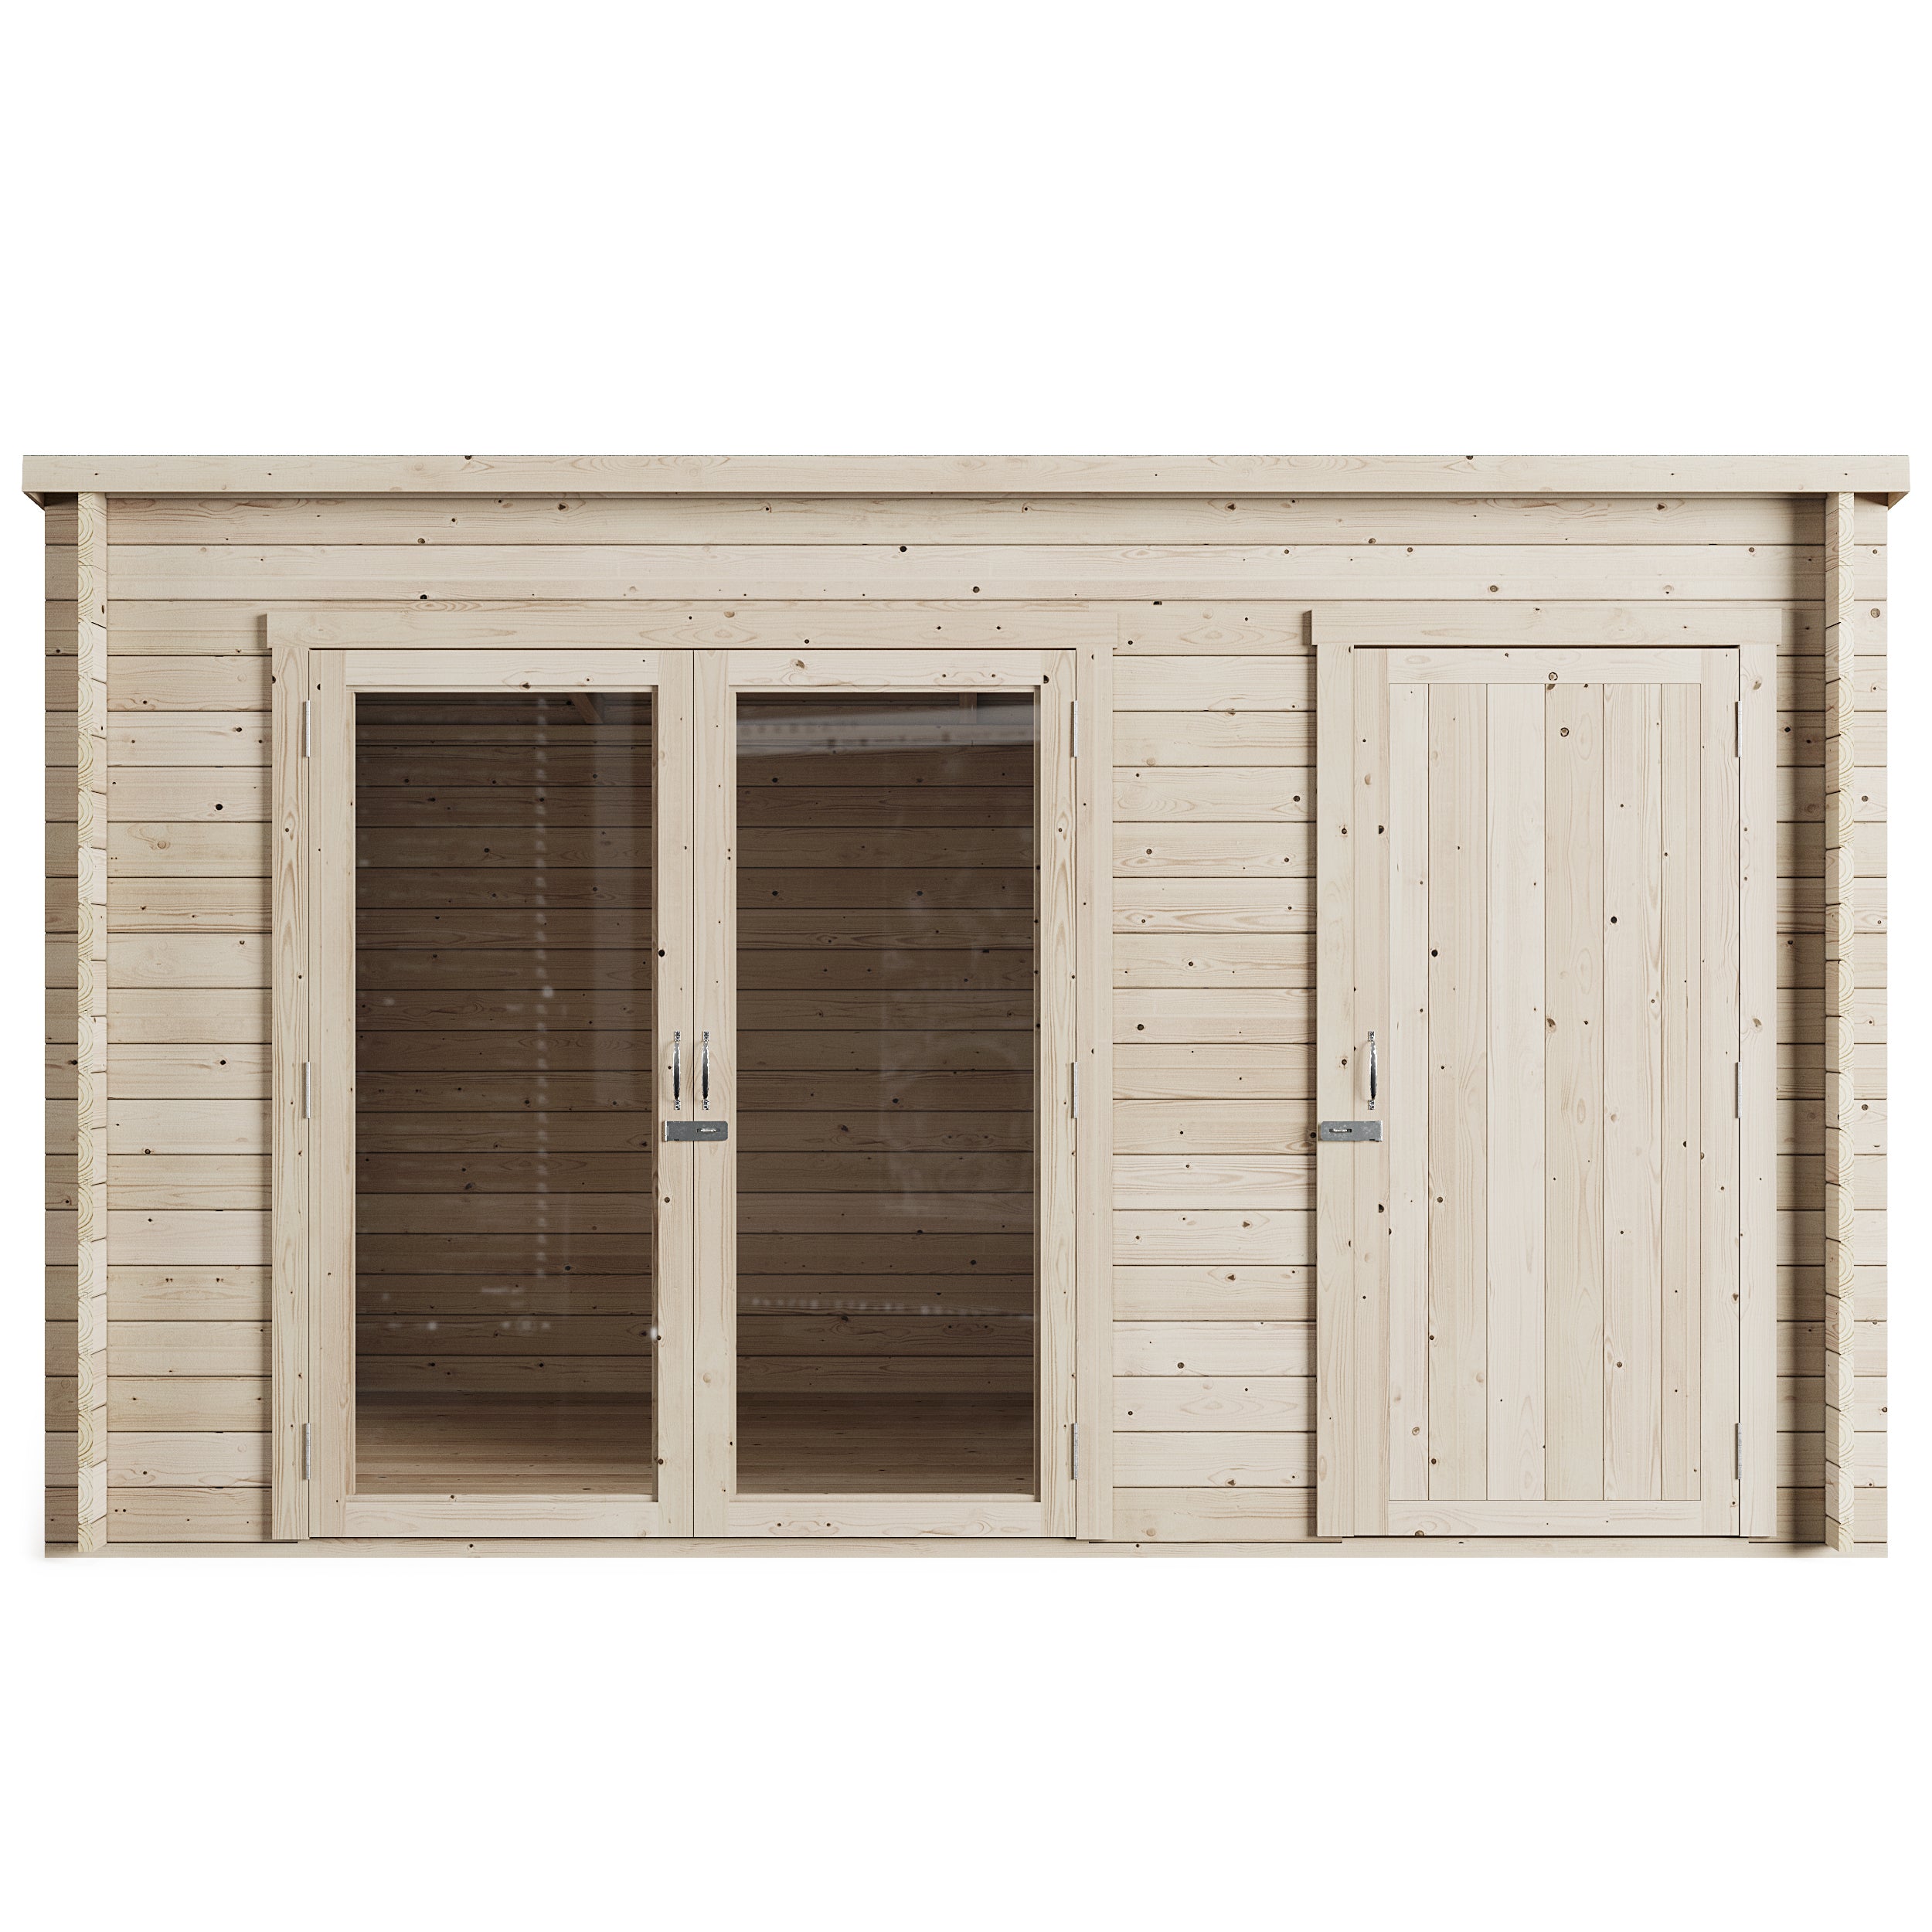 Store More Darton Pent Log Cabin Summerhouse with Side Store - Pressure Treated - 12ft x 8ft